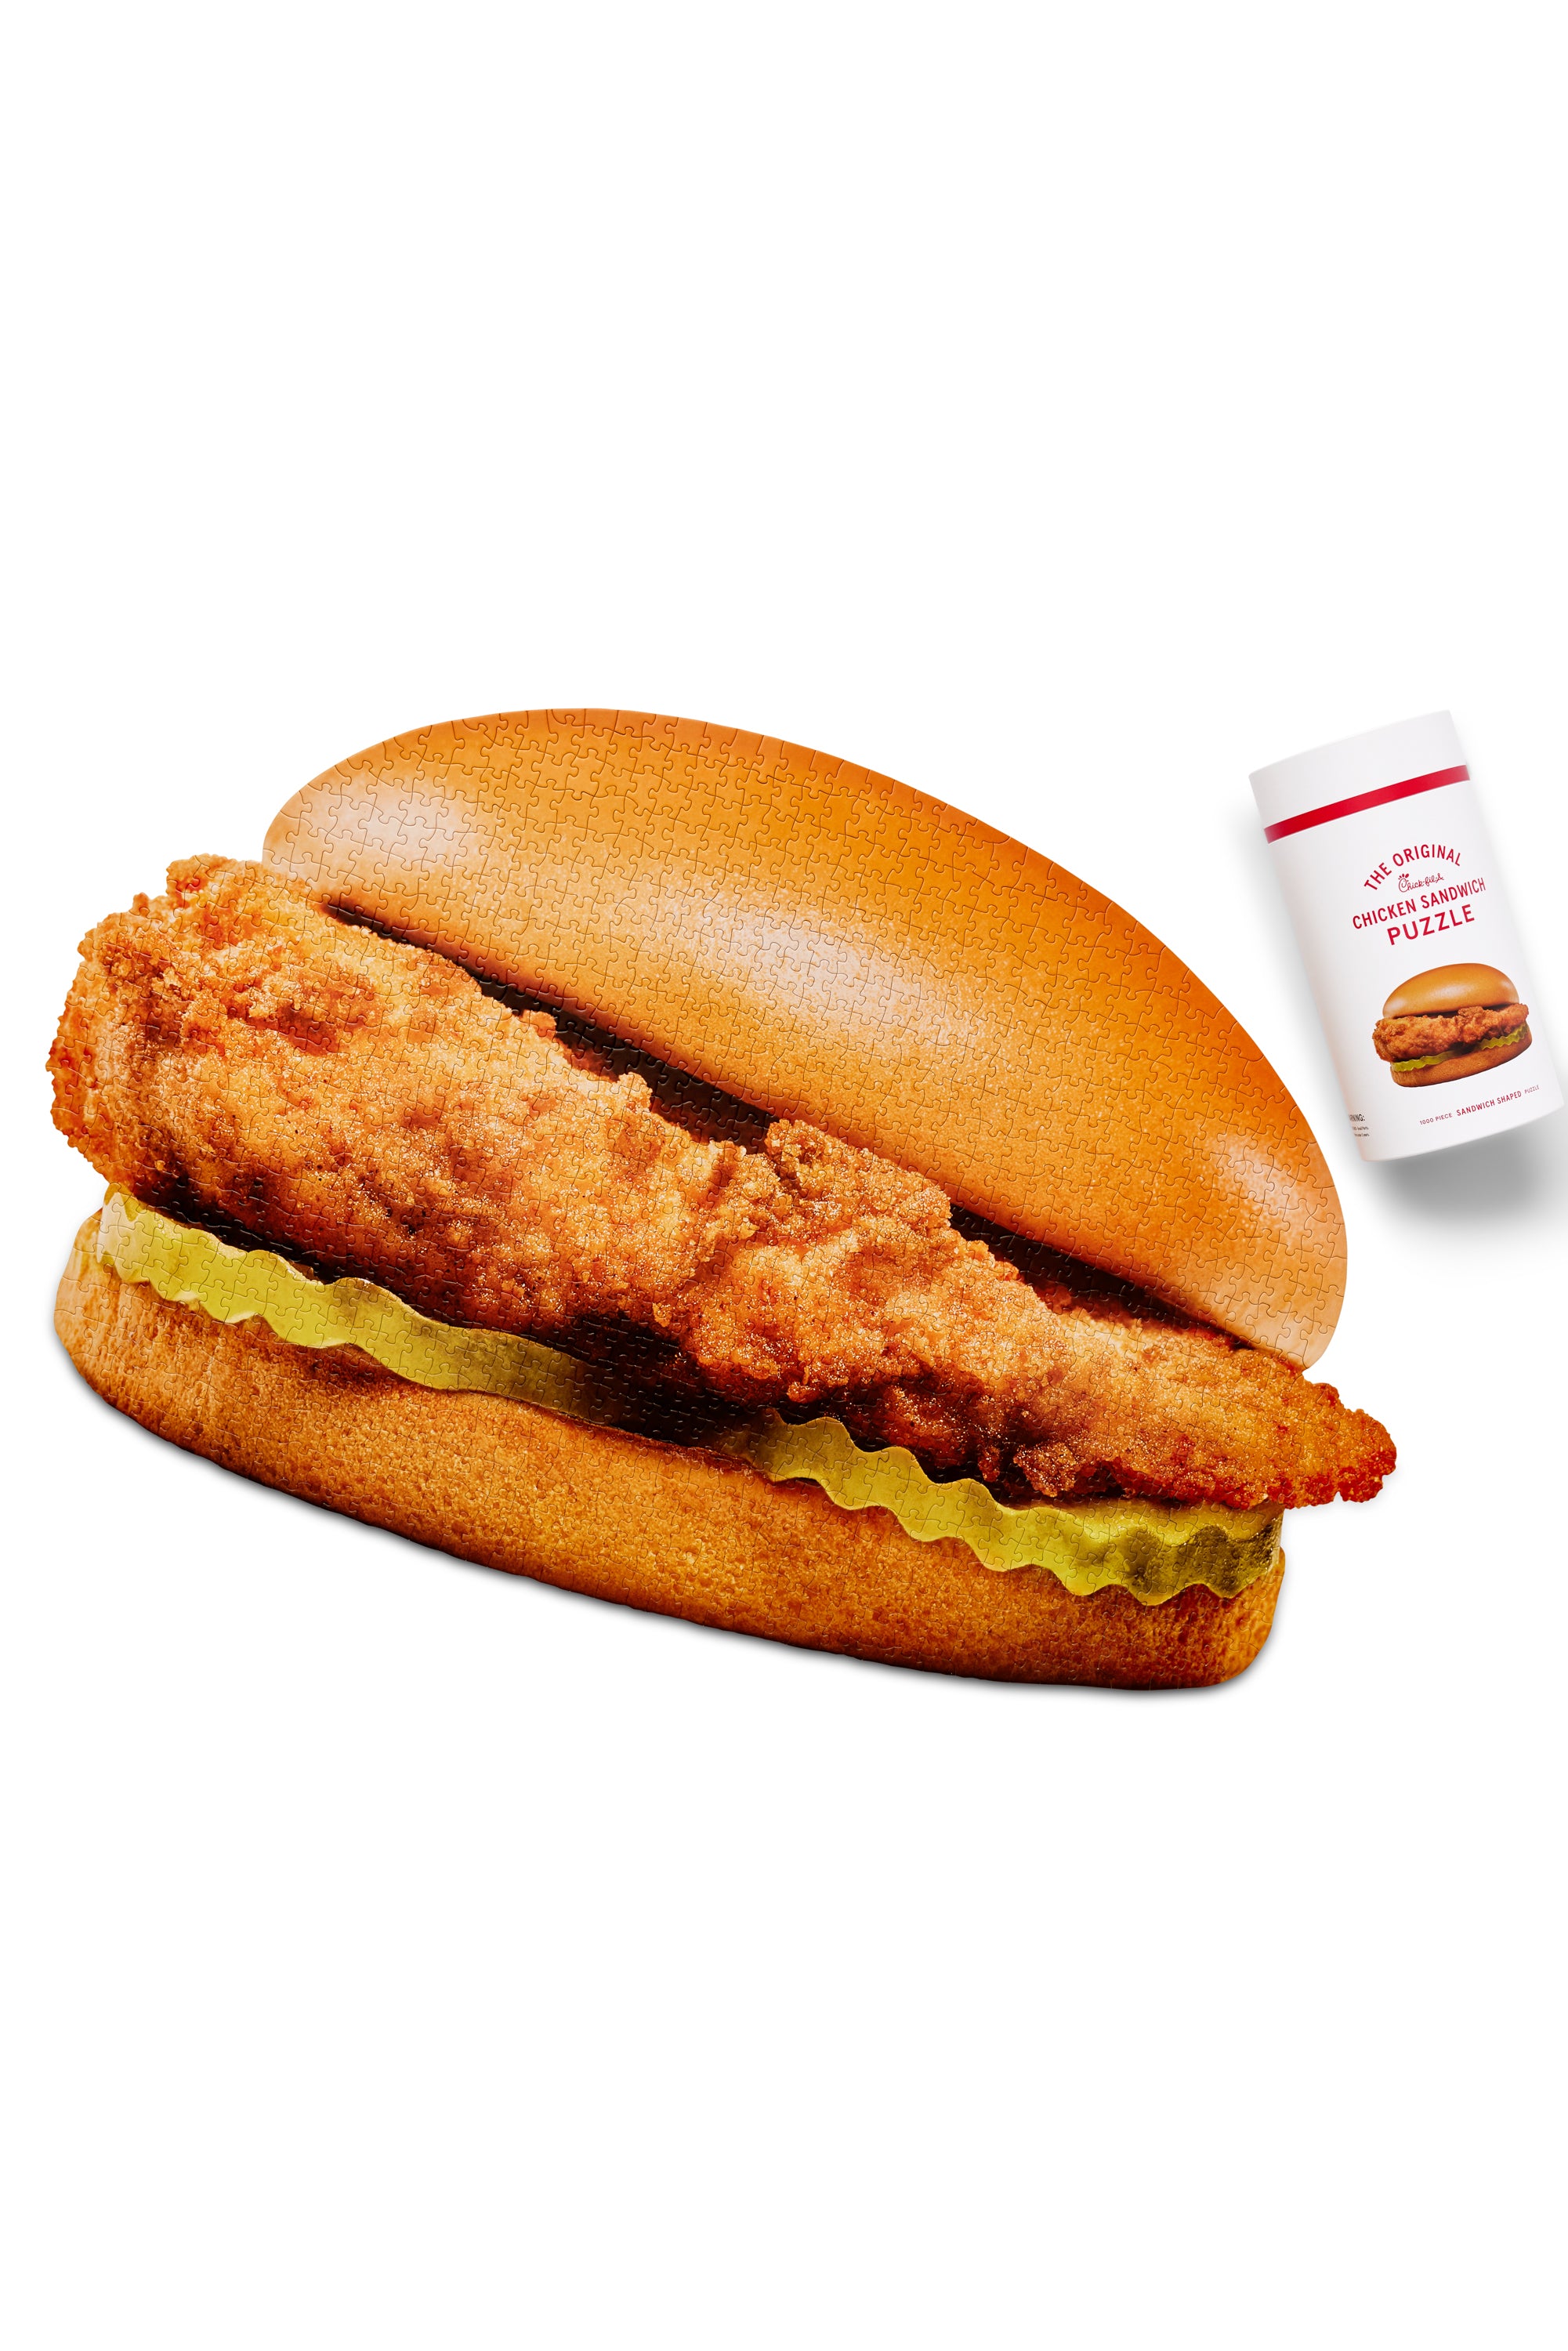 The Original Chick‑fil‑A® Chicken Sandwich Shaped Puzzle Completed with its container next to it